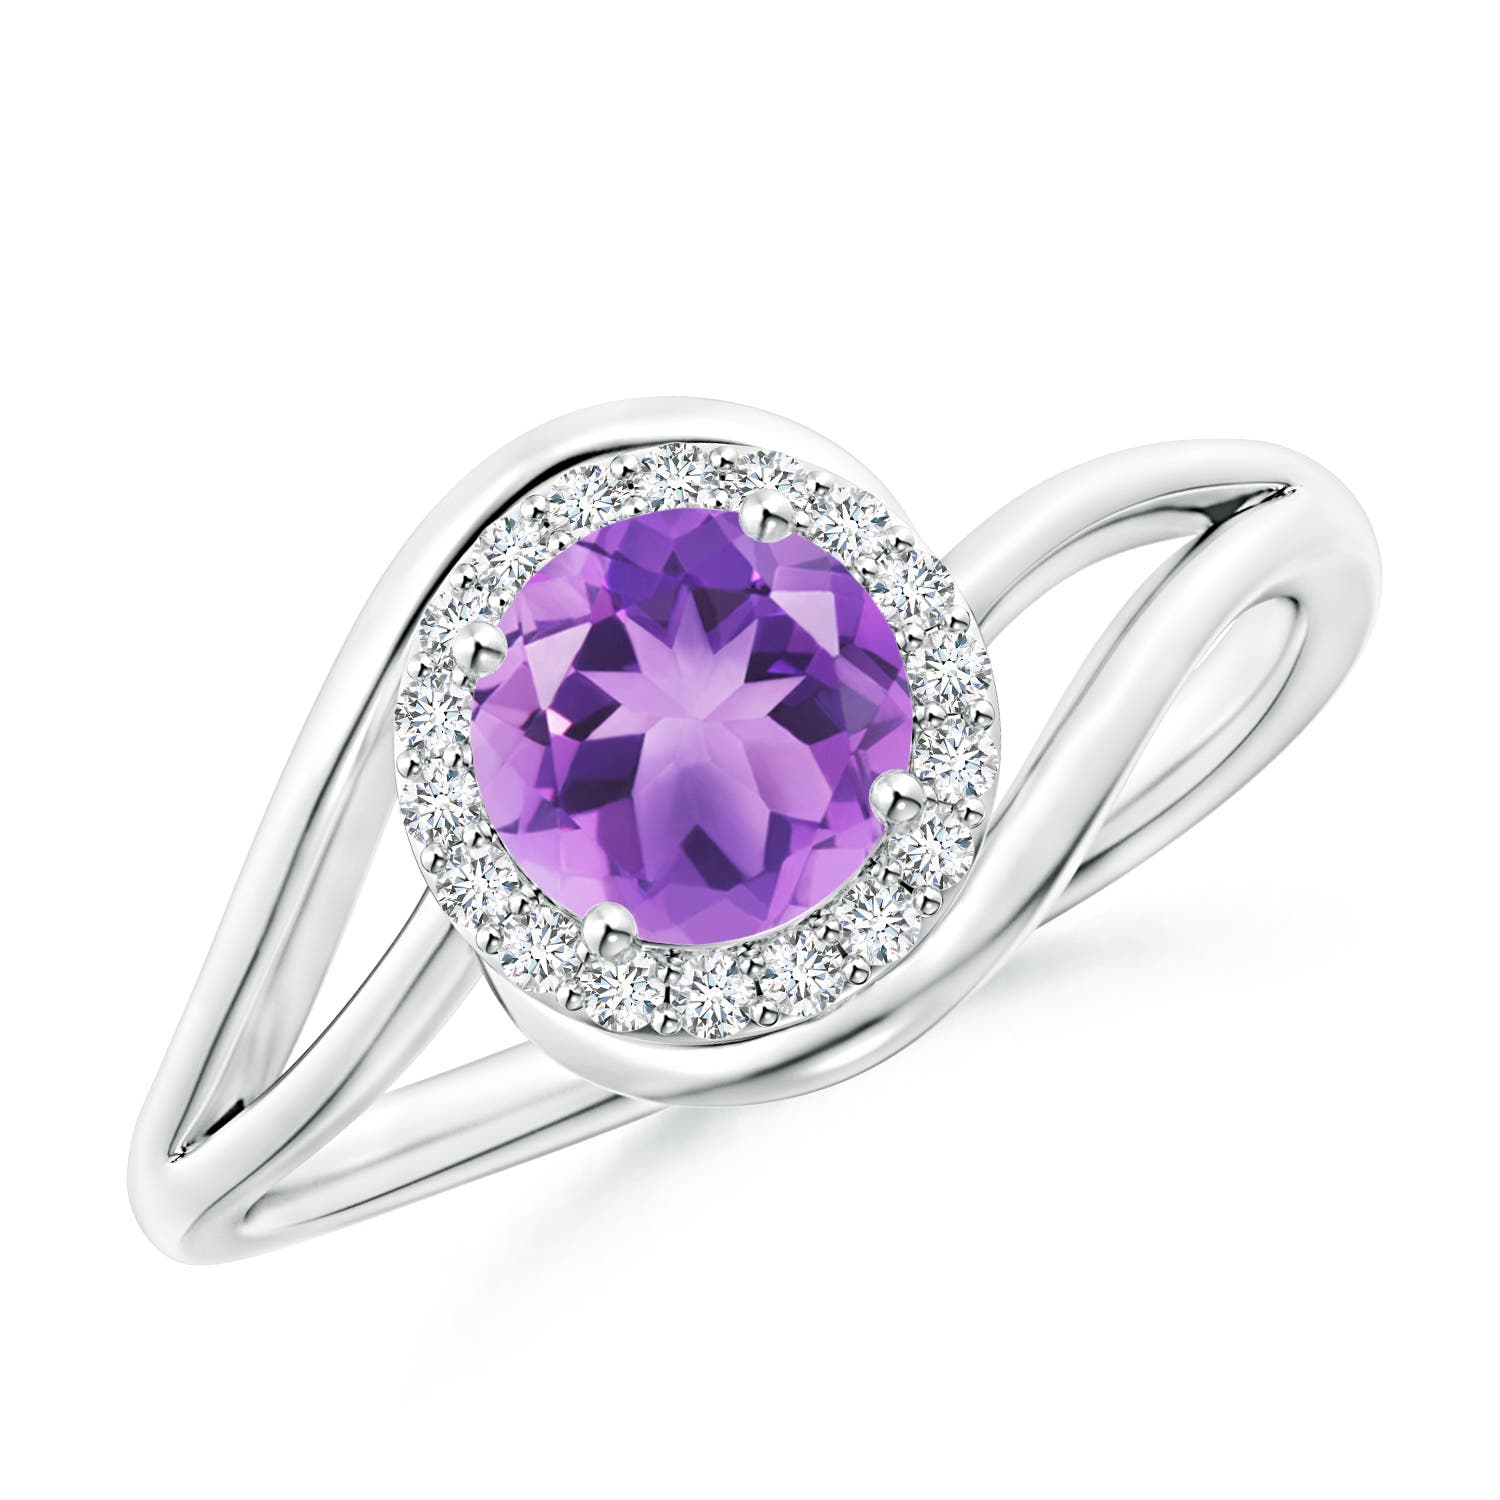 A - Amethyst / 0.91 CT / 14 KT White Gold